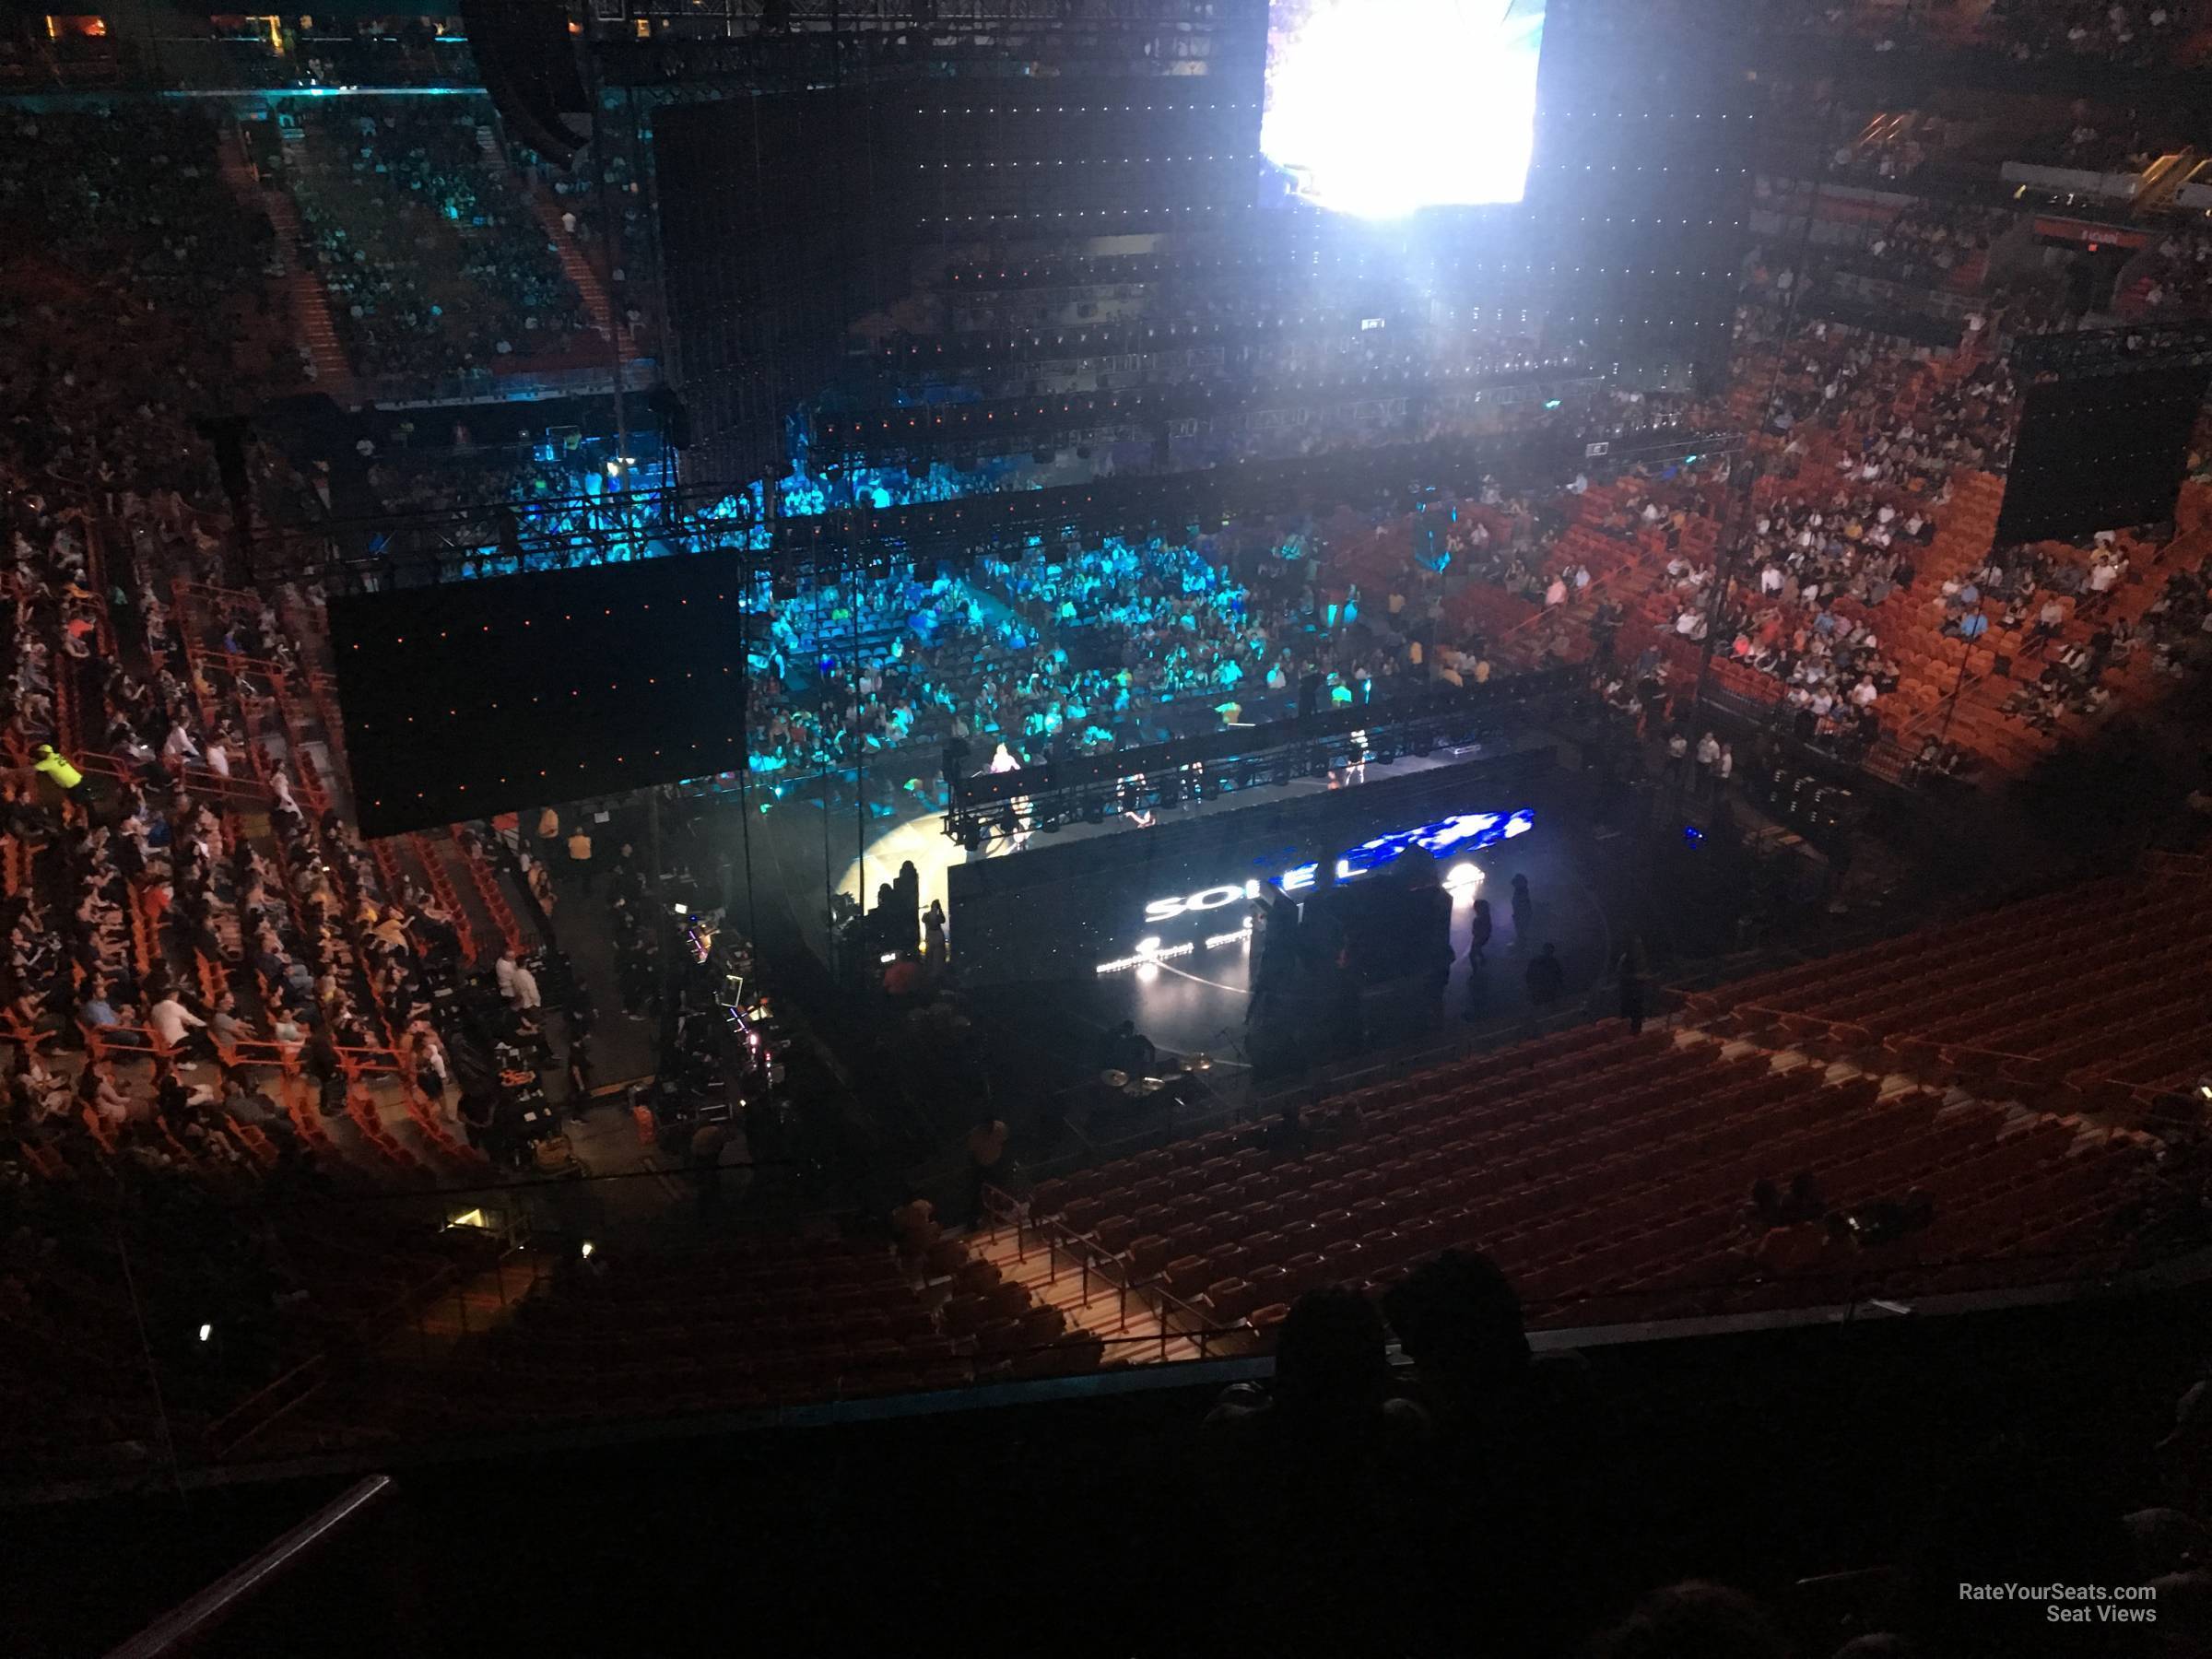 section 302, row 3 seat view  for concert - kaseya center